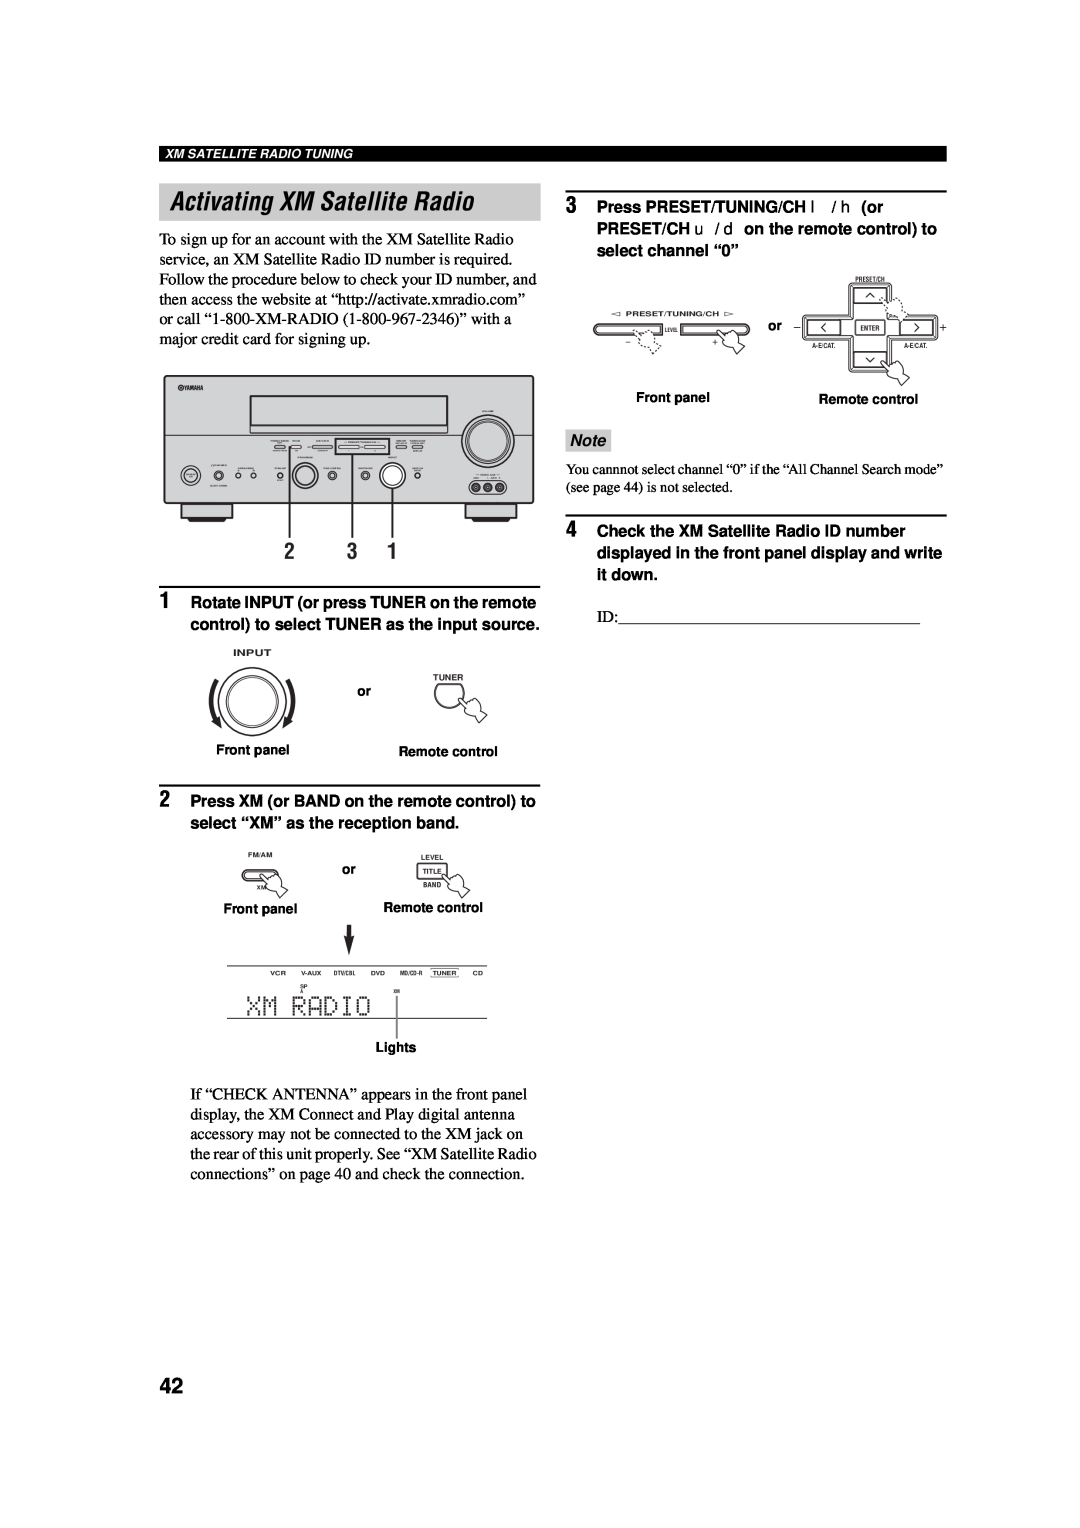 Yamaha AV Receiver owner manual Activating XM Satellite Radio, Xmradio, Press PRESET/TUNING/CH l / h or, select channel “0” 